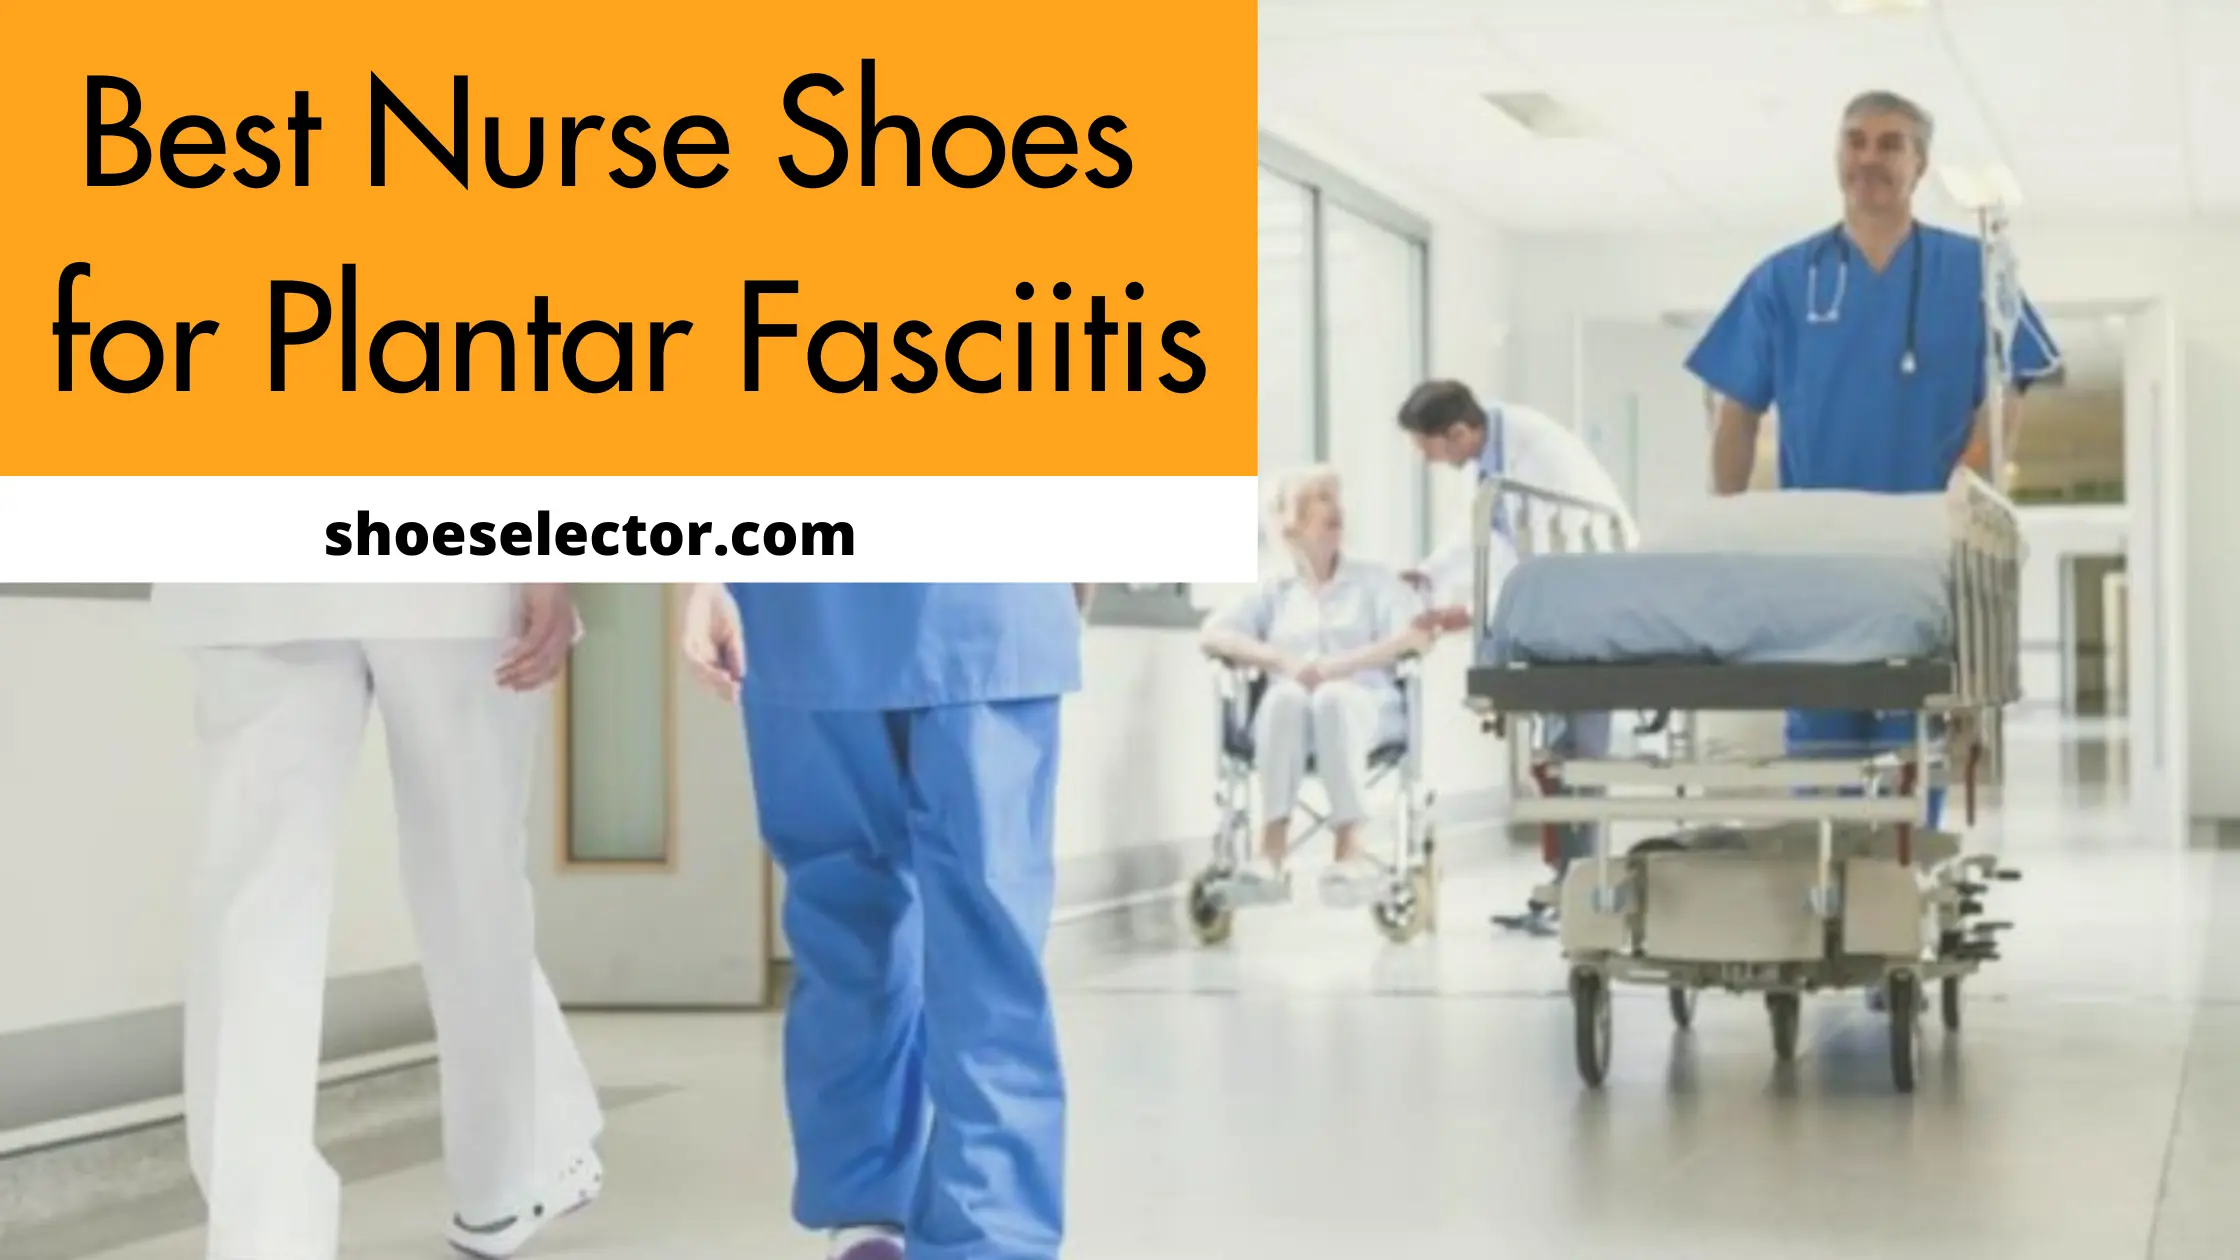 Best Golf Shoes For Plantar Fasciitis - Latest Guide